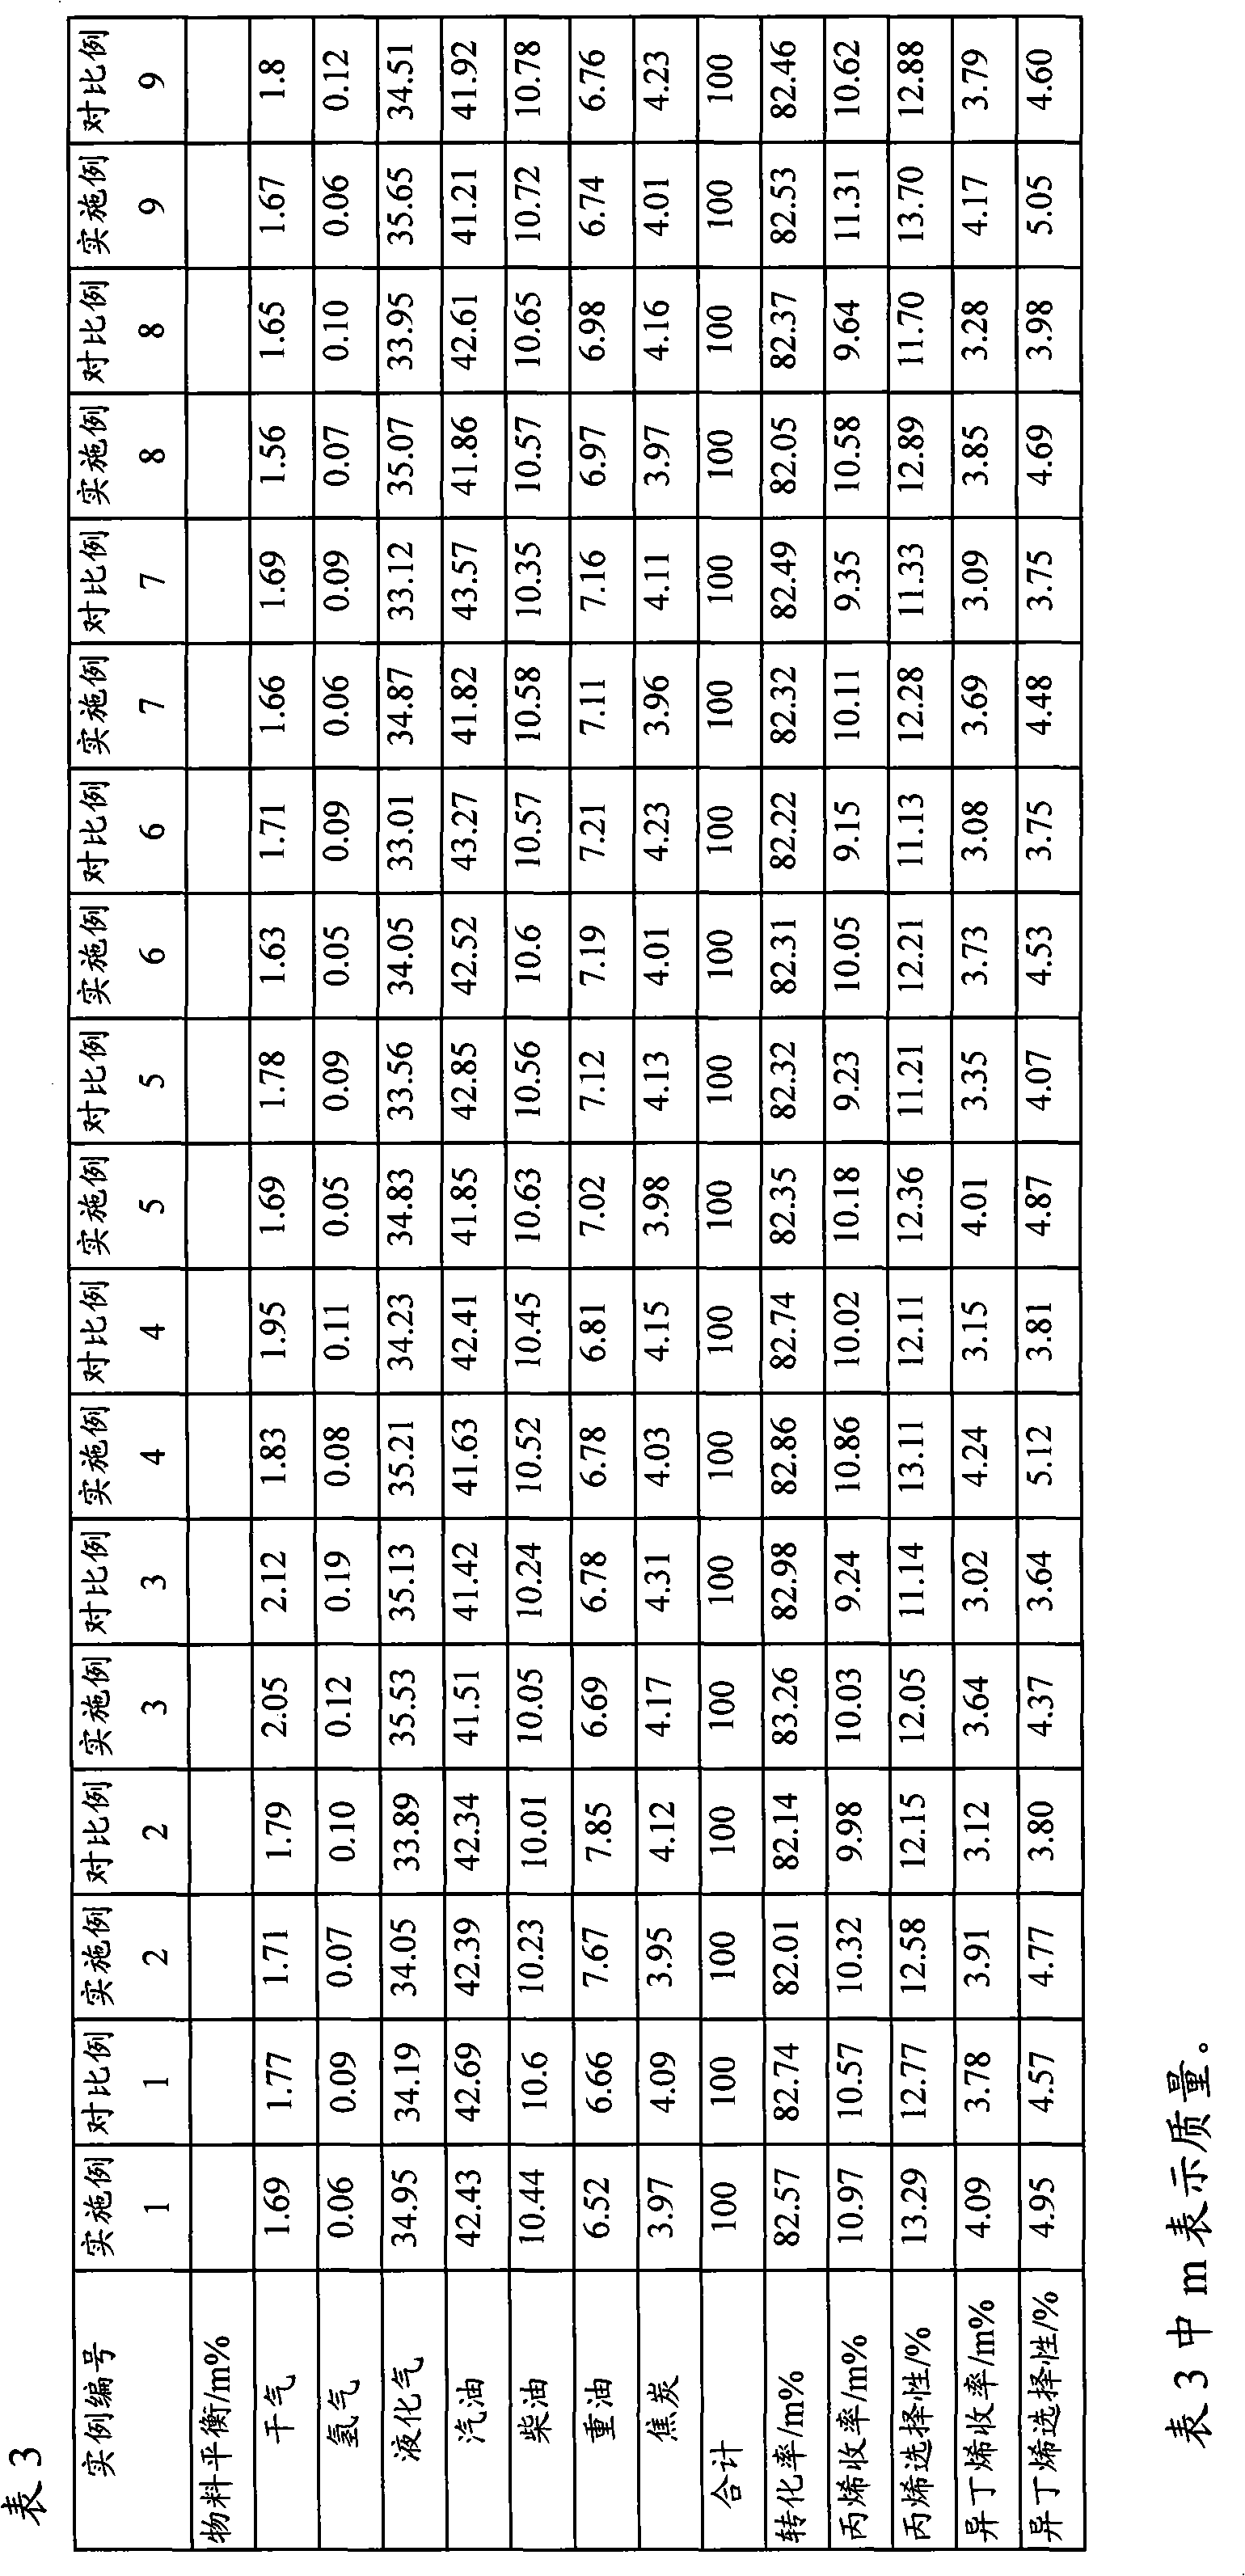 MFI structure molecular sieve containing phosphorus and transition metals, and preparation method thereof